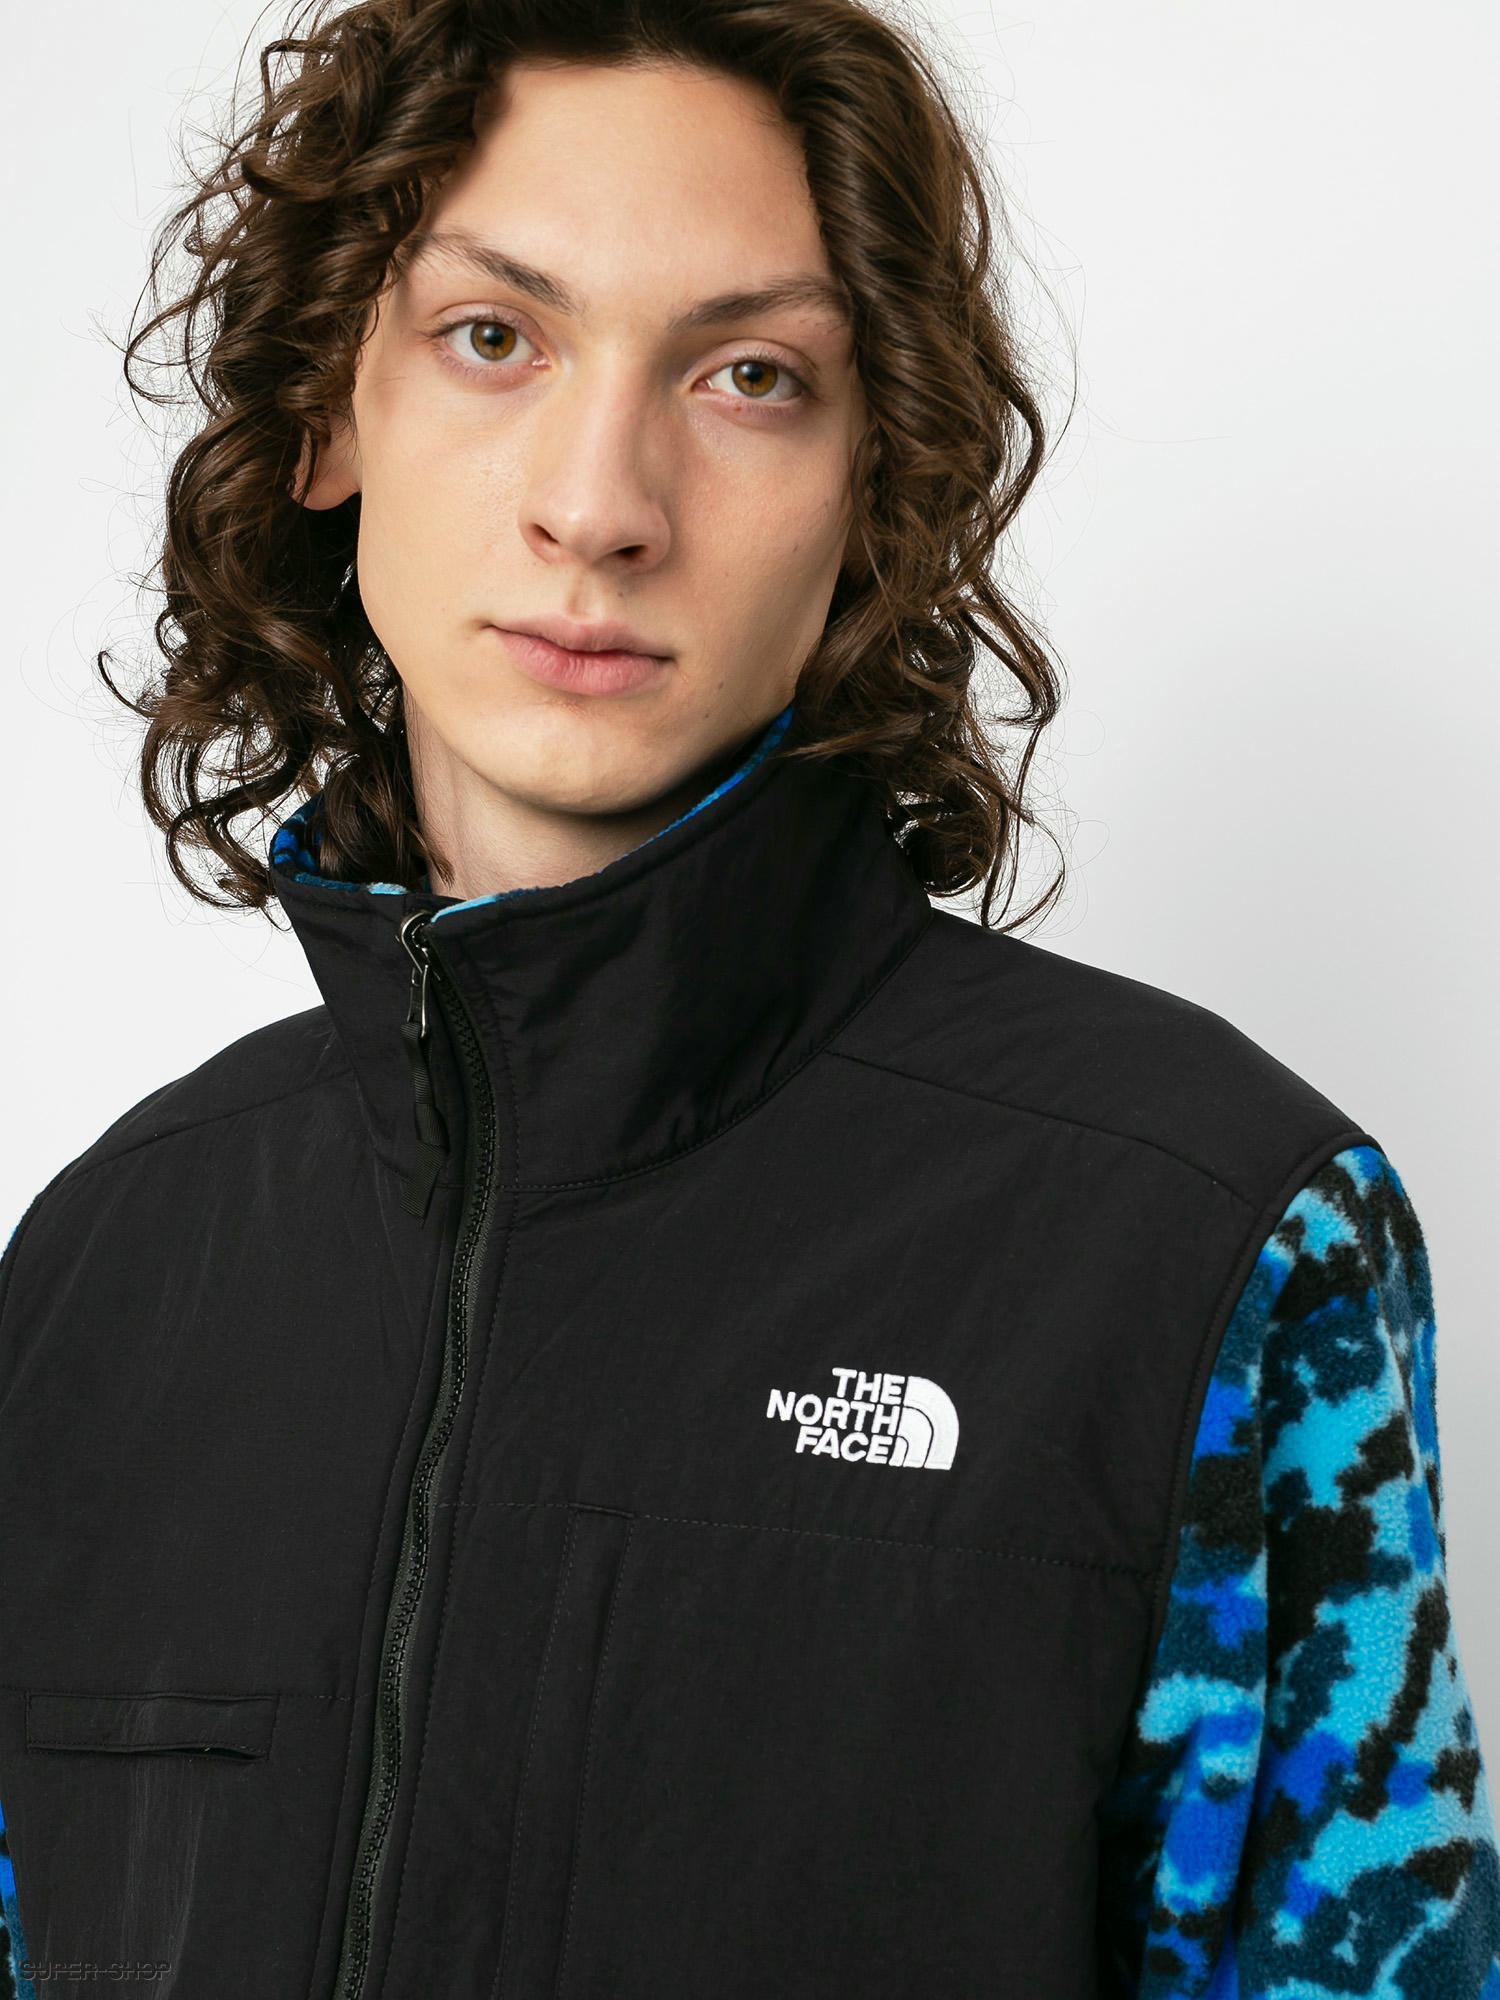 the north face mens top